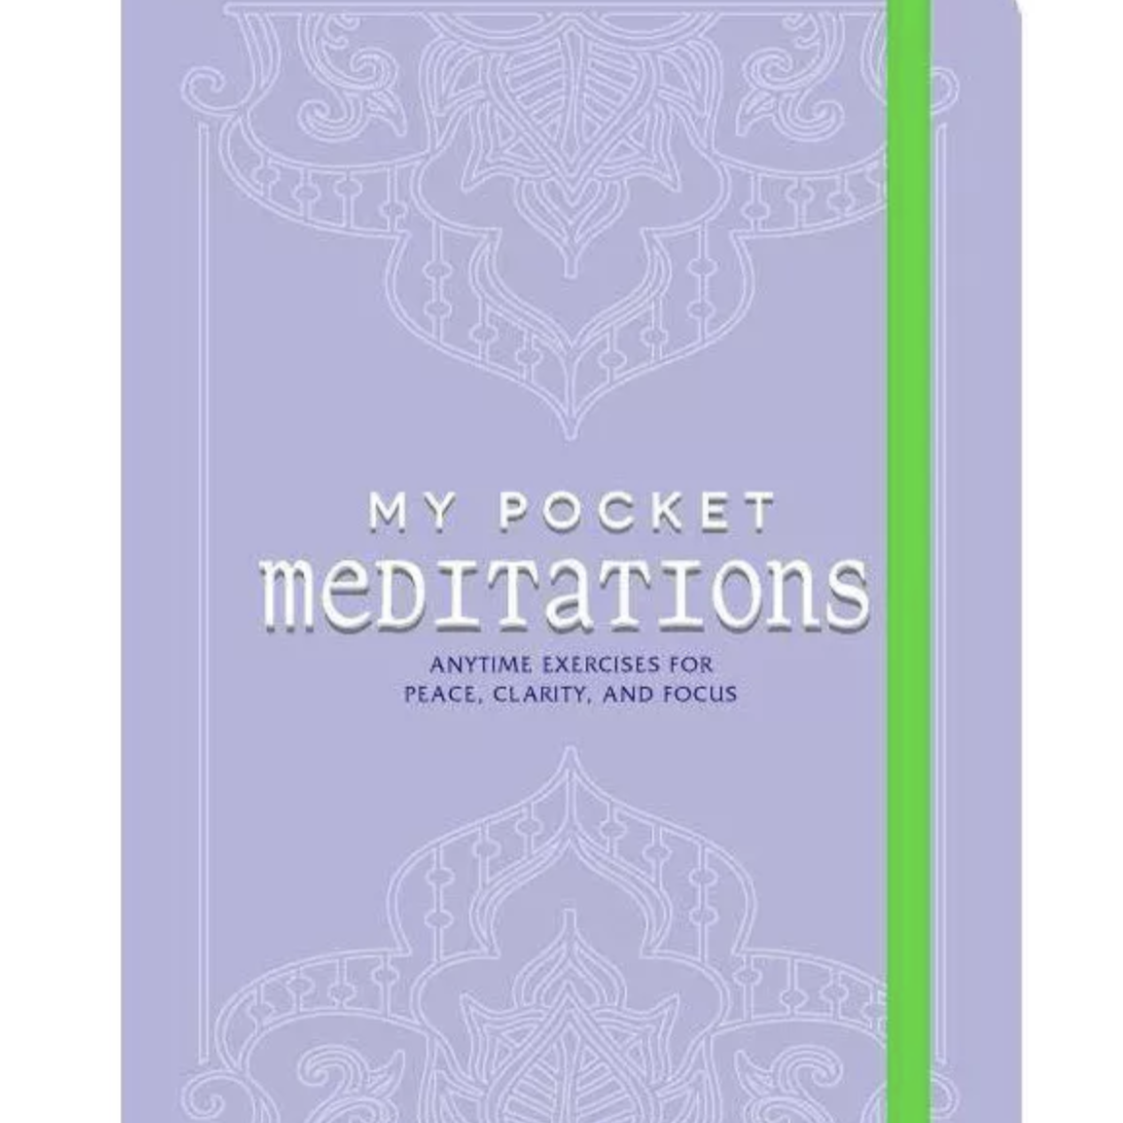 My Pocket Meditations Book For "Anytime Exercises For Peace, Clarity, And Focus"